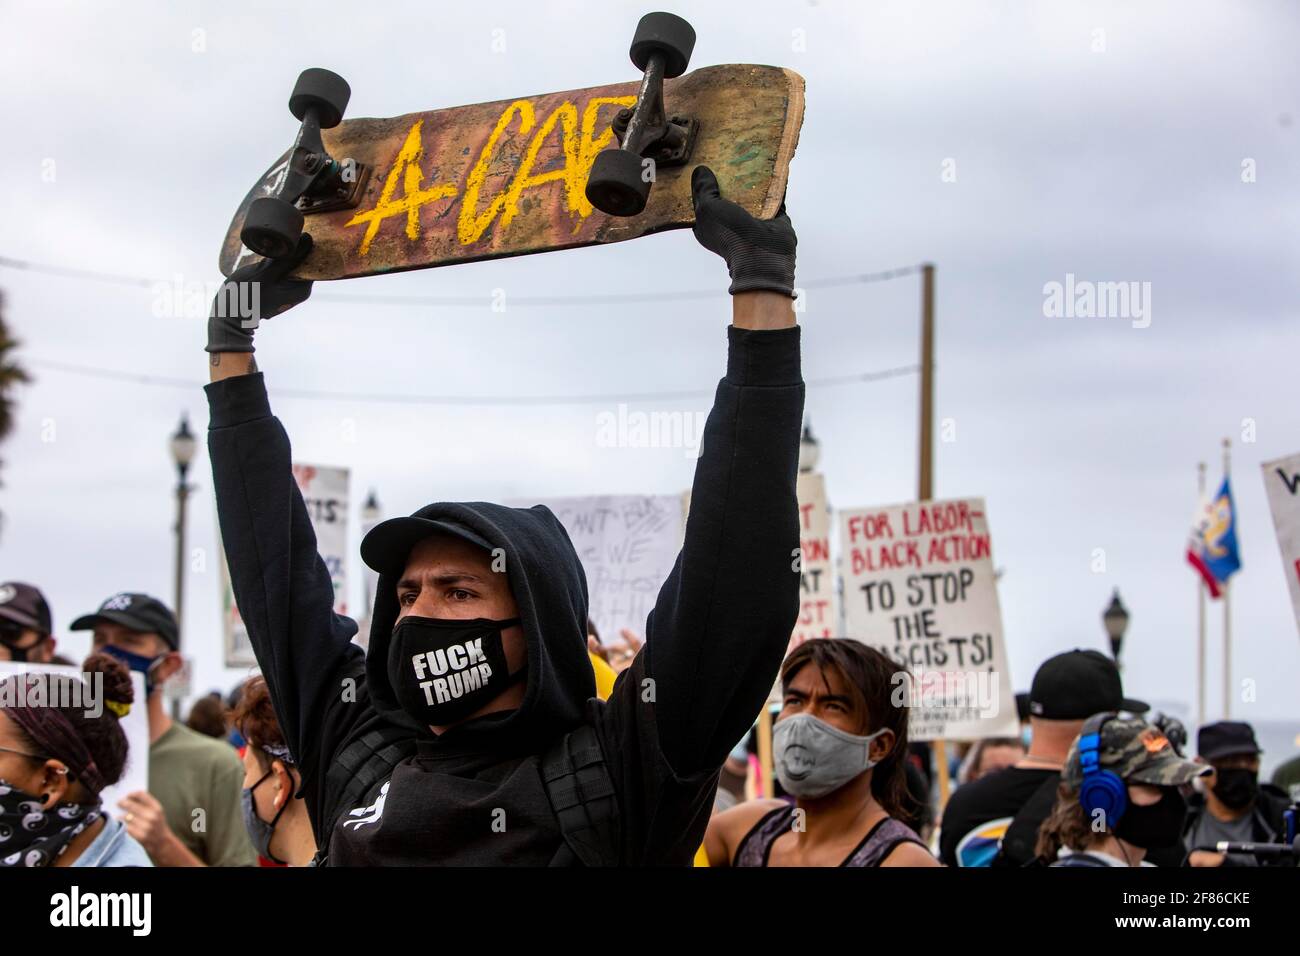 Los Angeles, California, USA. 11th Apr, 2021. A counter protester holds a skateboard up during a counter protest to a planned White Lives Matter rally at the Huntington Beach Pier. Credit: Jill Connelly/ZUMA Wire/Alamy Live News Stock Photo